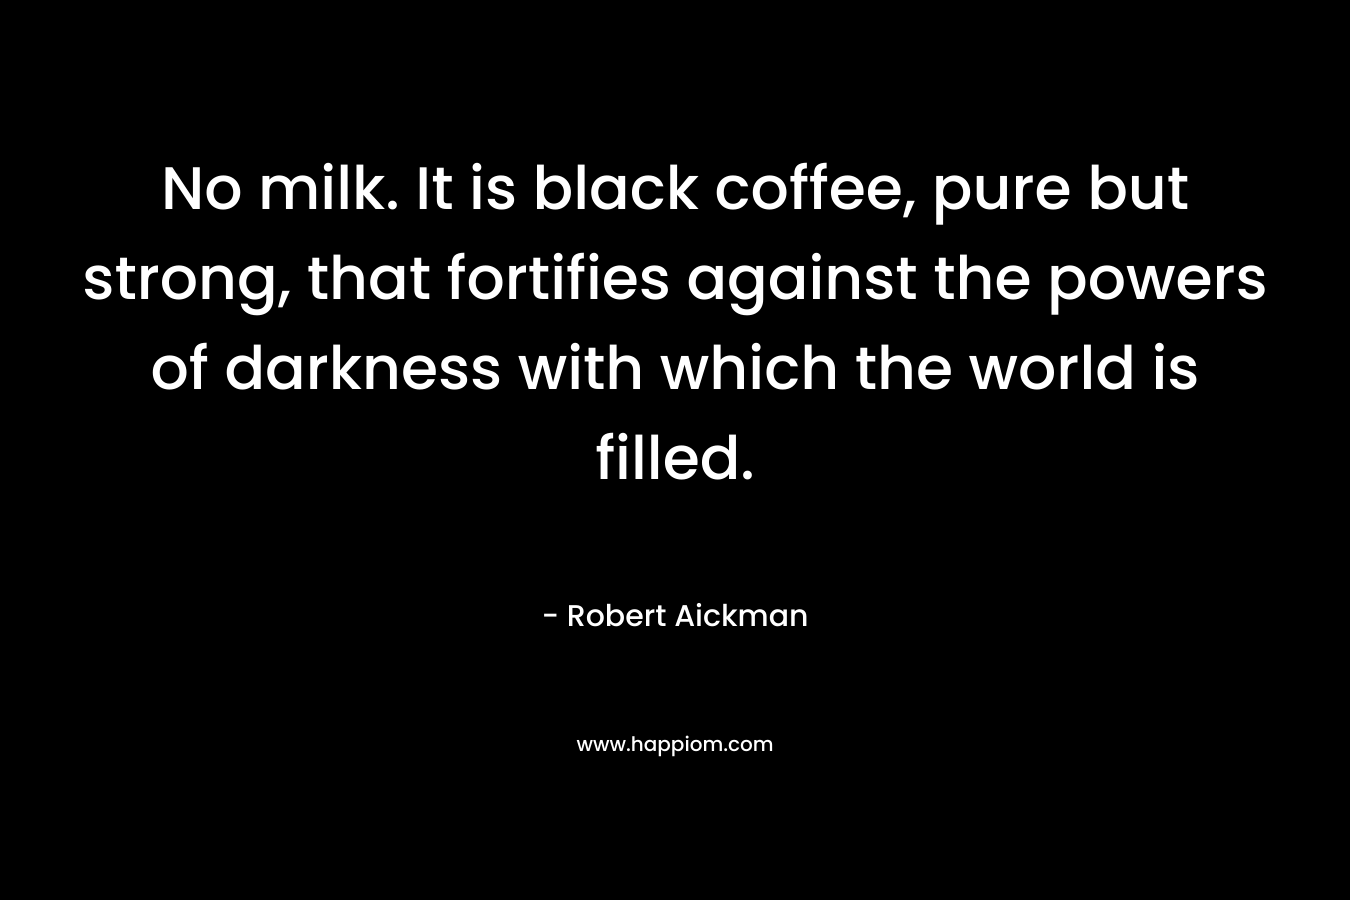 No milk. It is black coffee, pure but strong, that fortifies against the powers of darkness with which the world is filled.